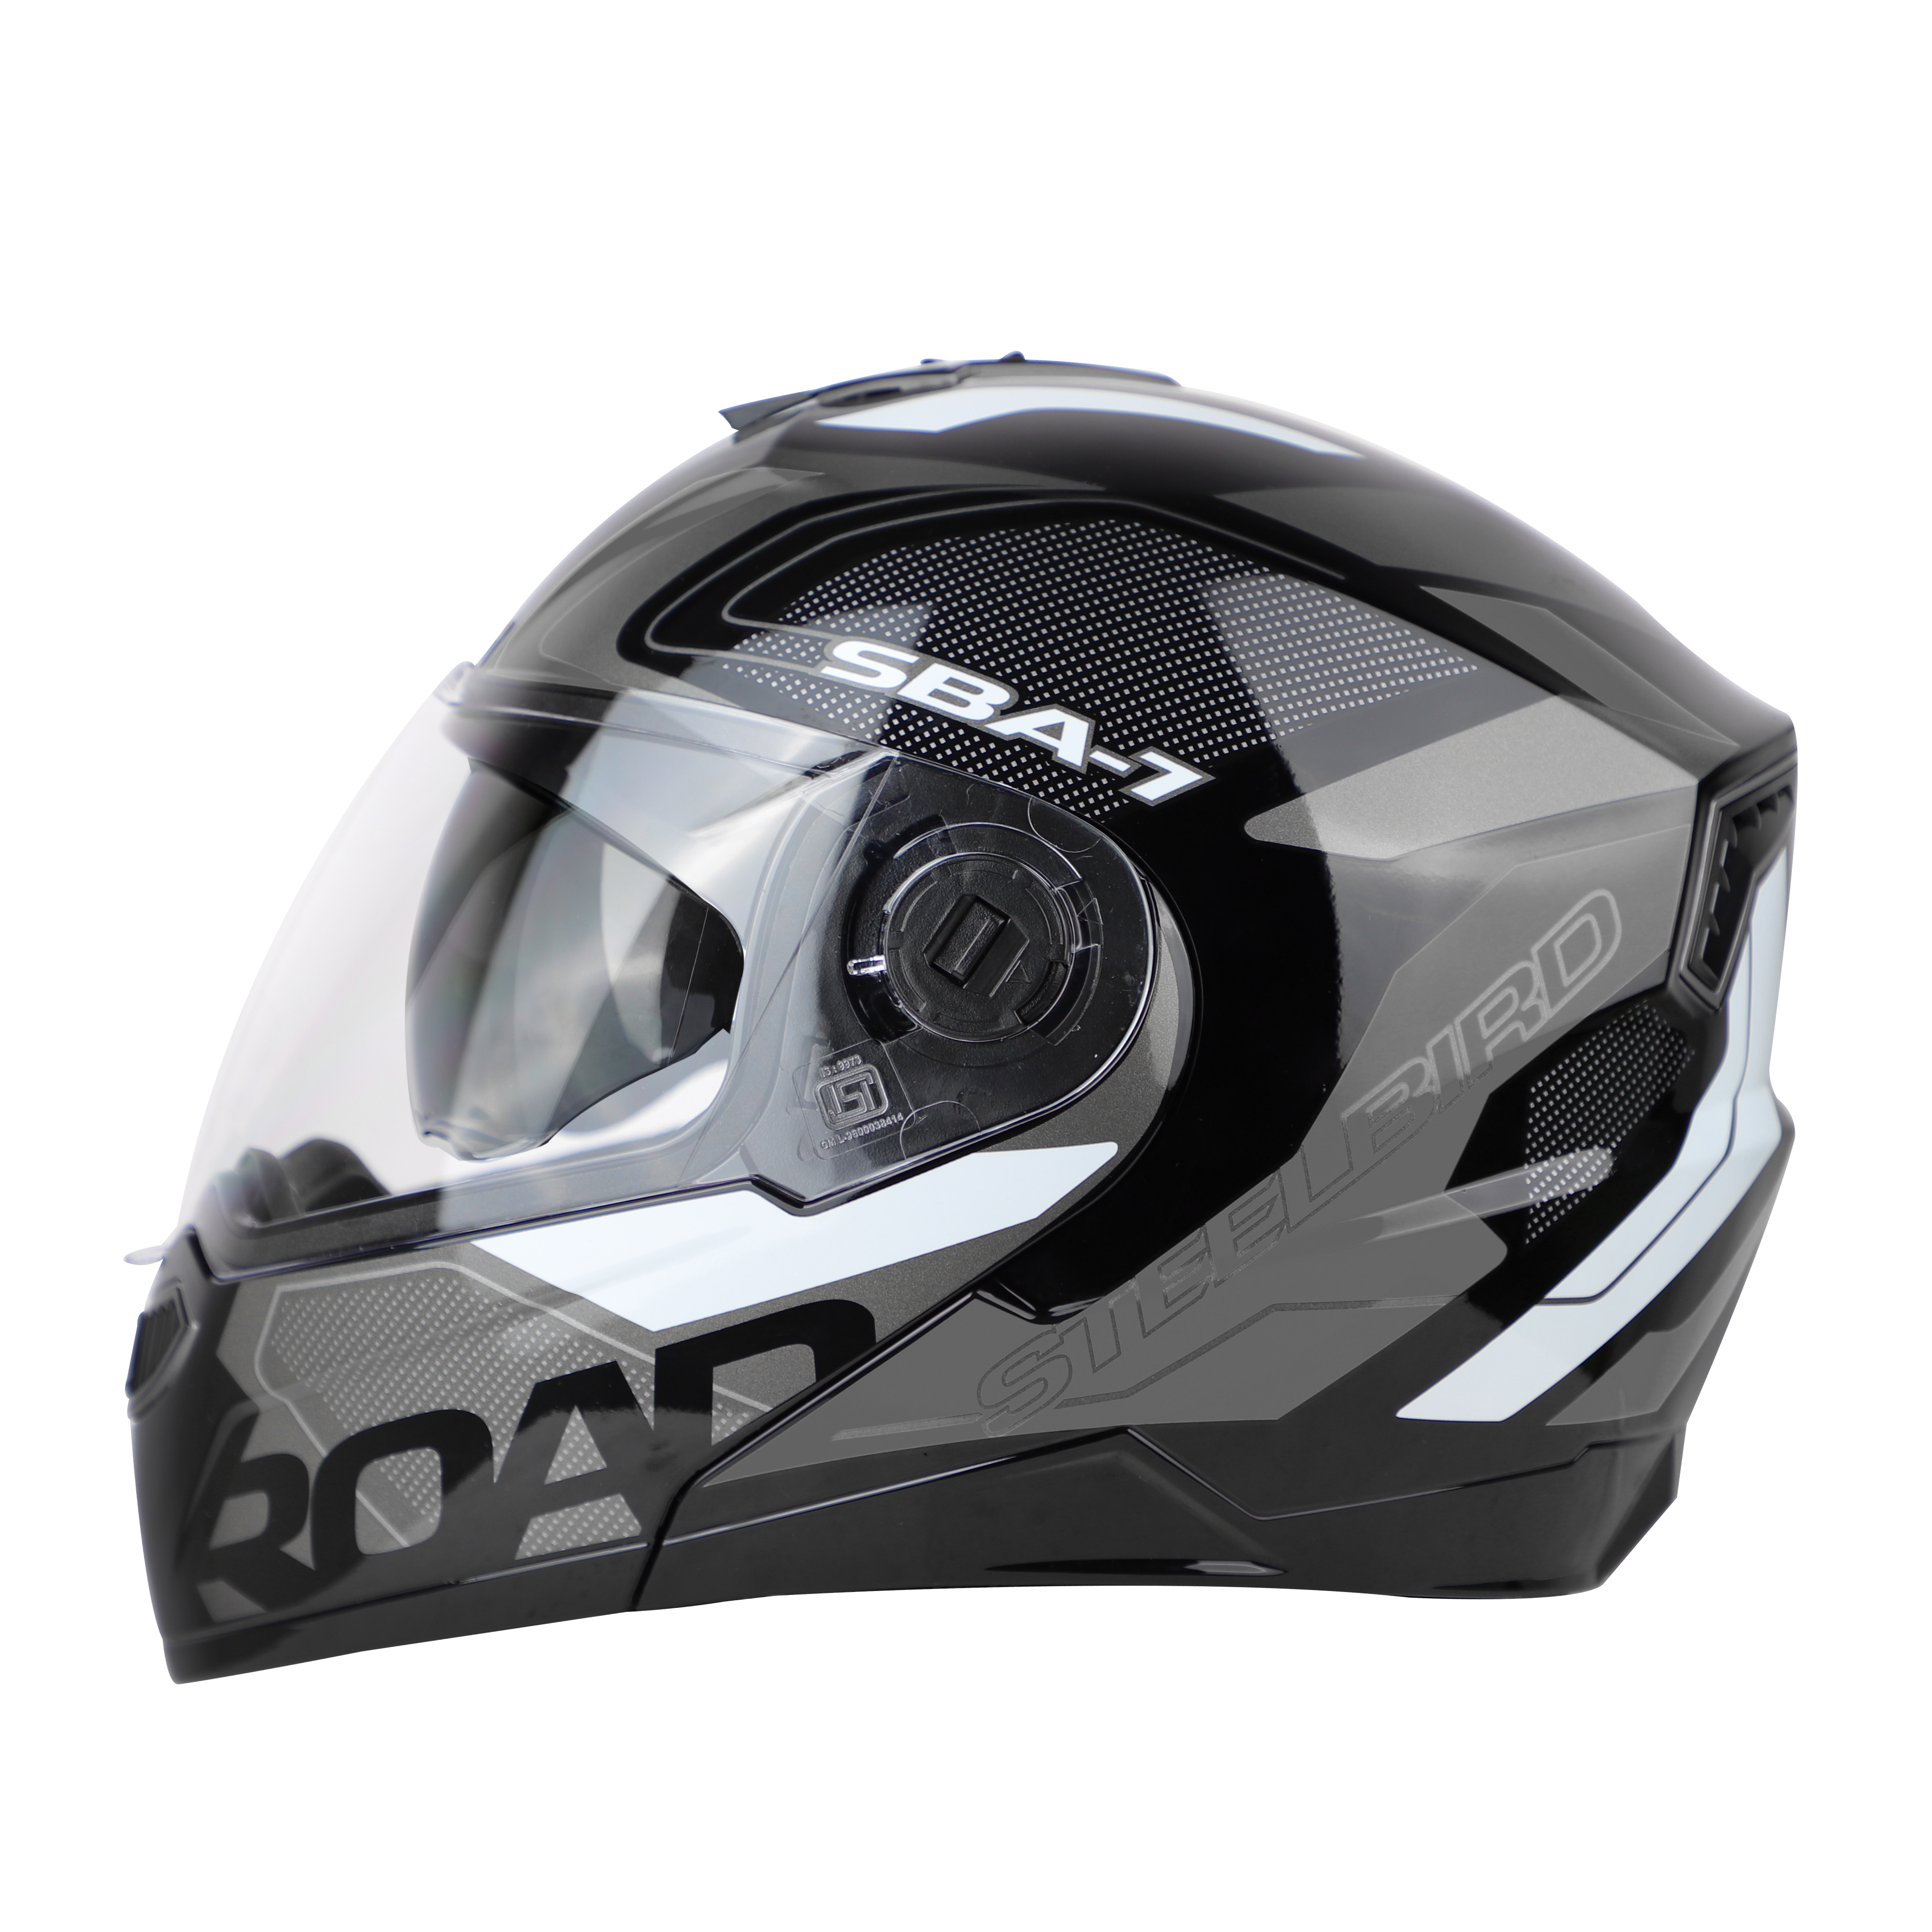 SBA-7 ROAD GLOSSY BLACK WITH GREY (WITH INNER SUNSHIELD)